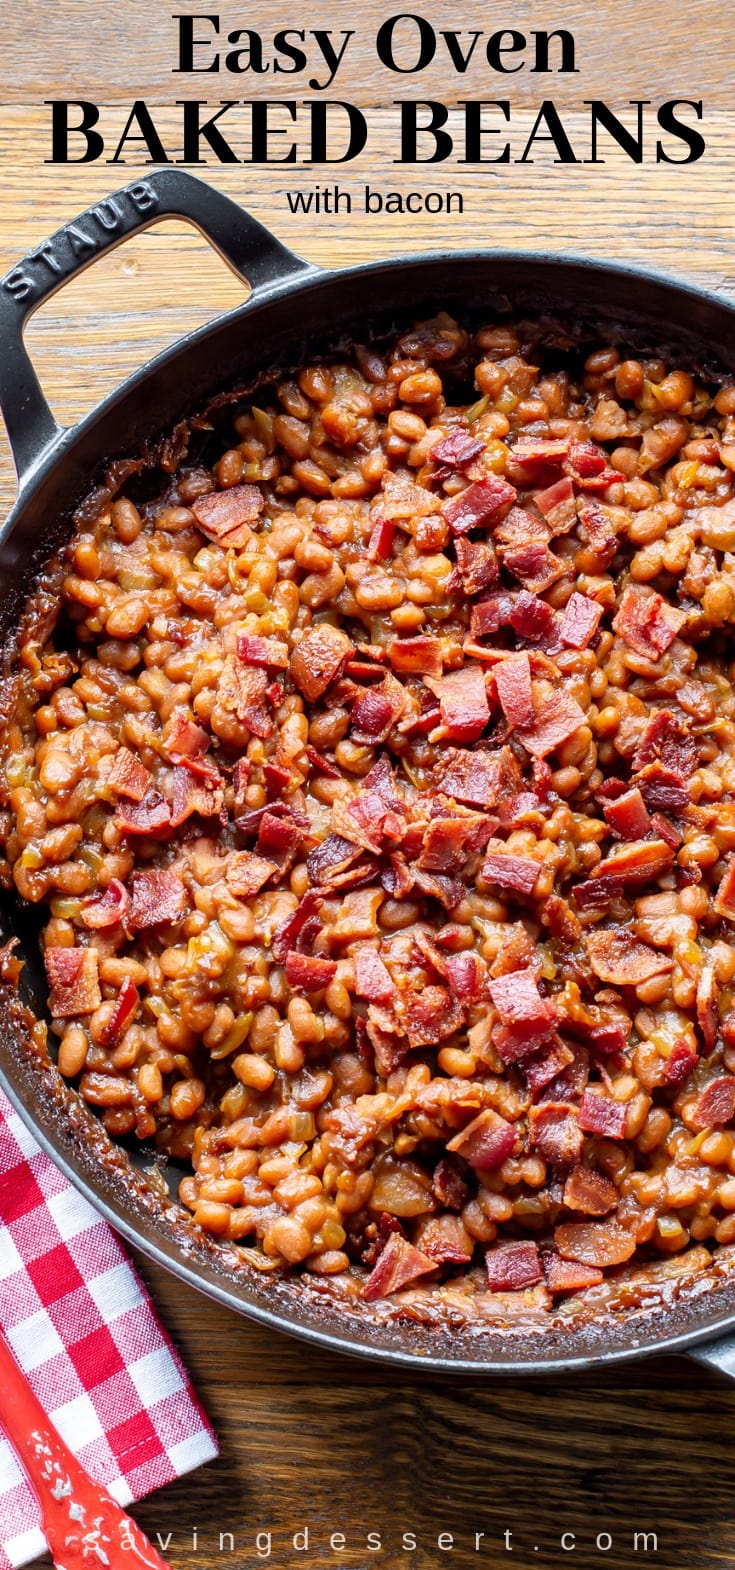 A big casserole dish with oven baked beans topped with crumbled bacon